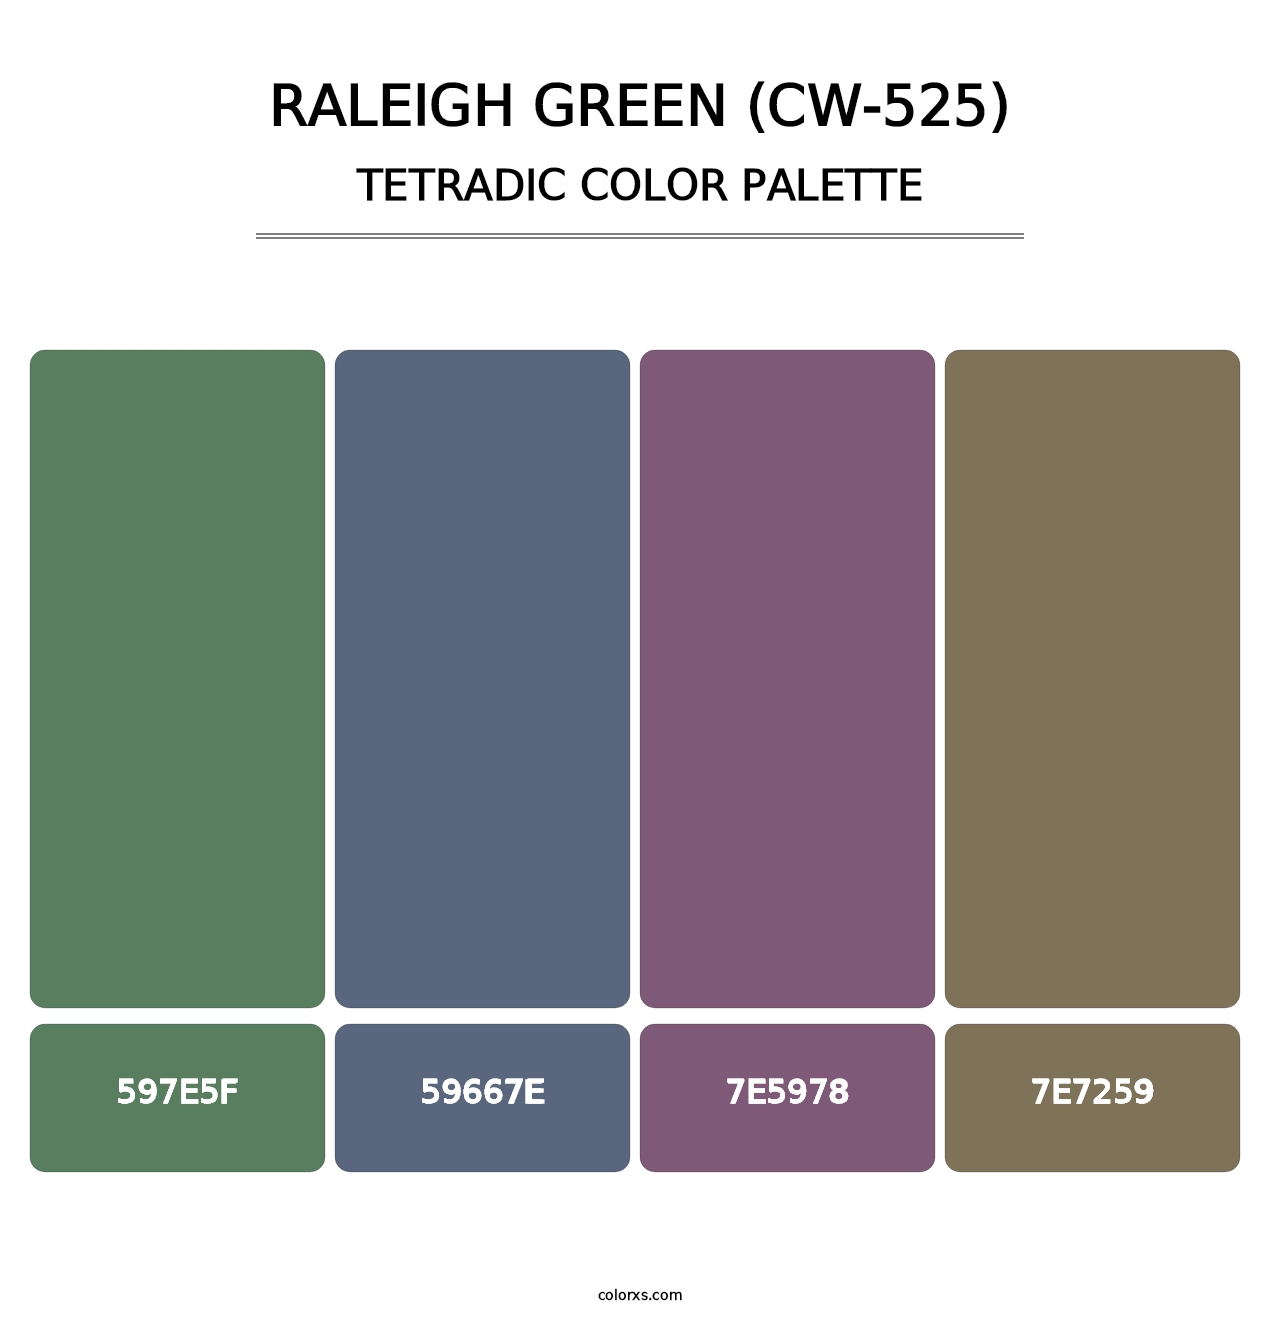 Raleigh Green (CW-525) - Tetradic Color Palette